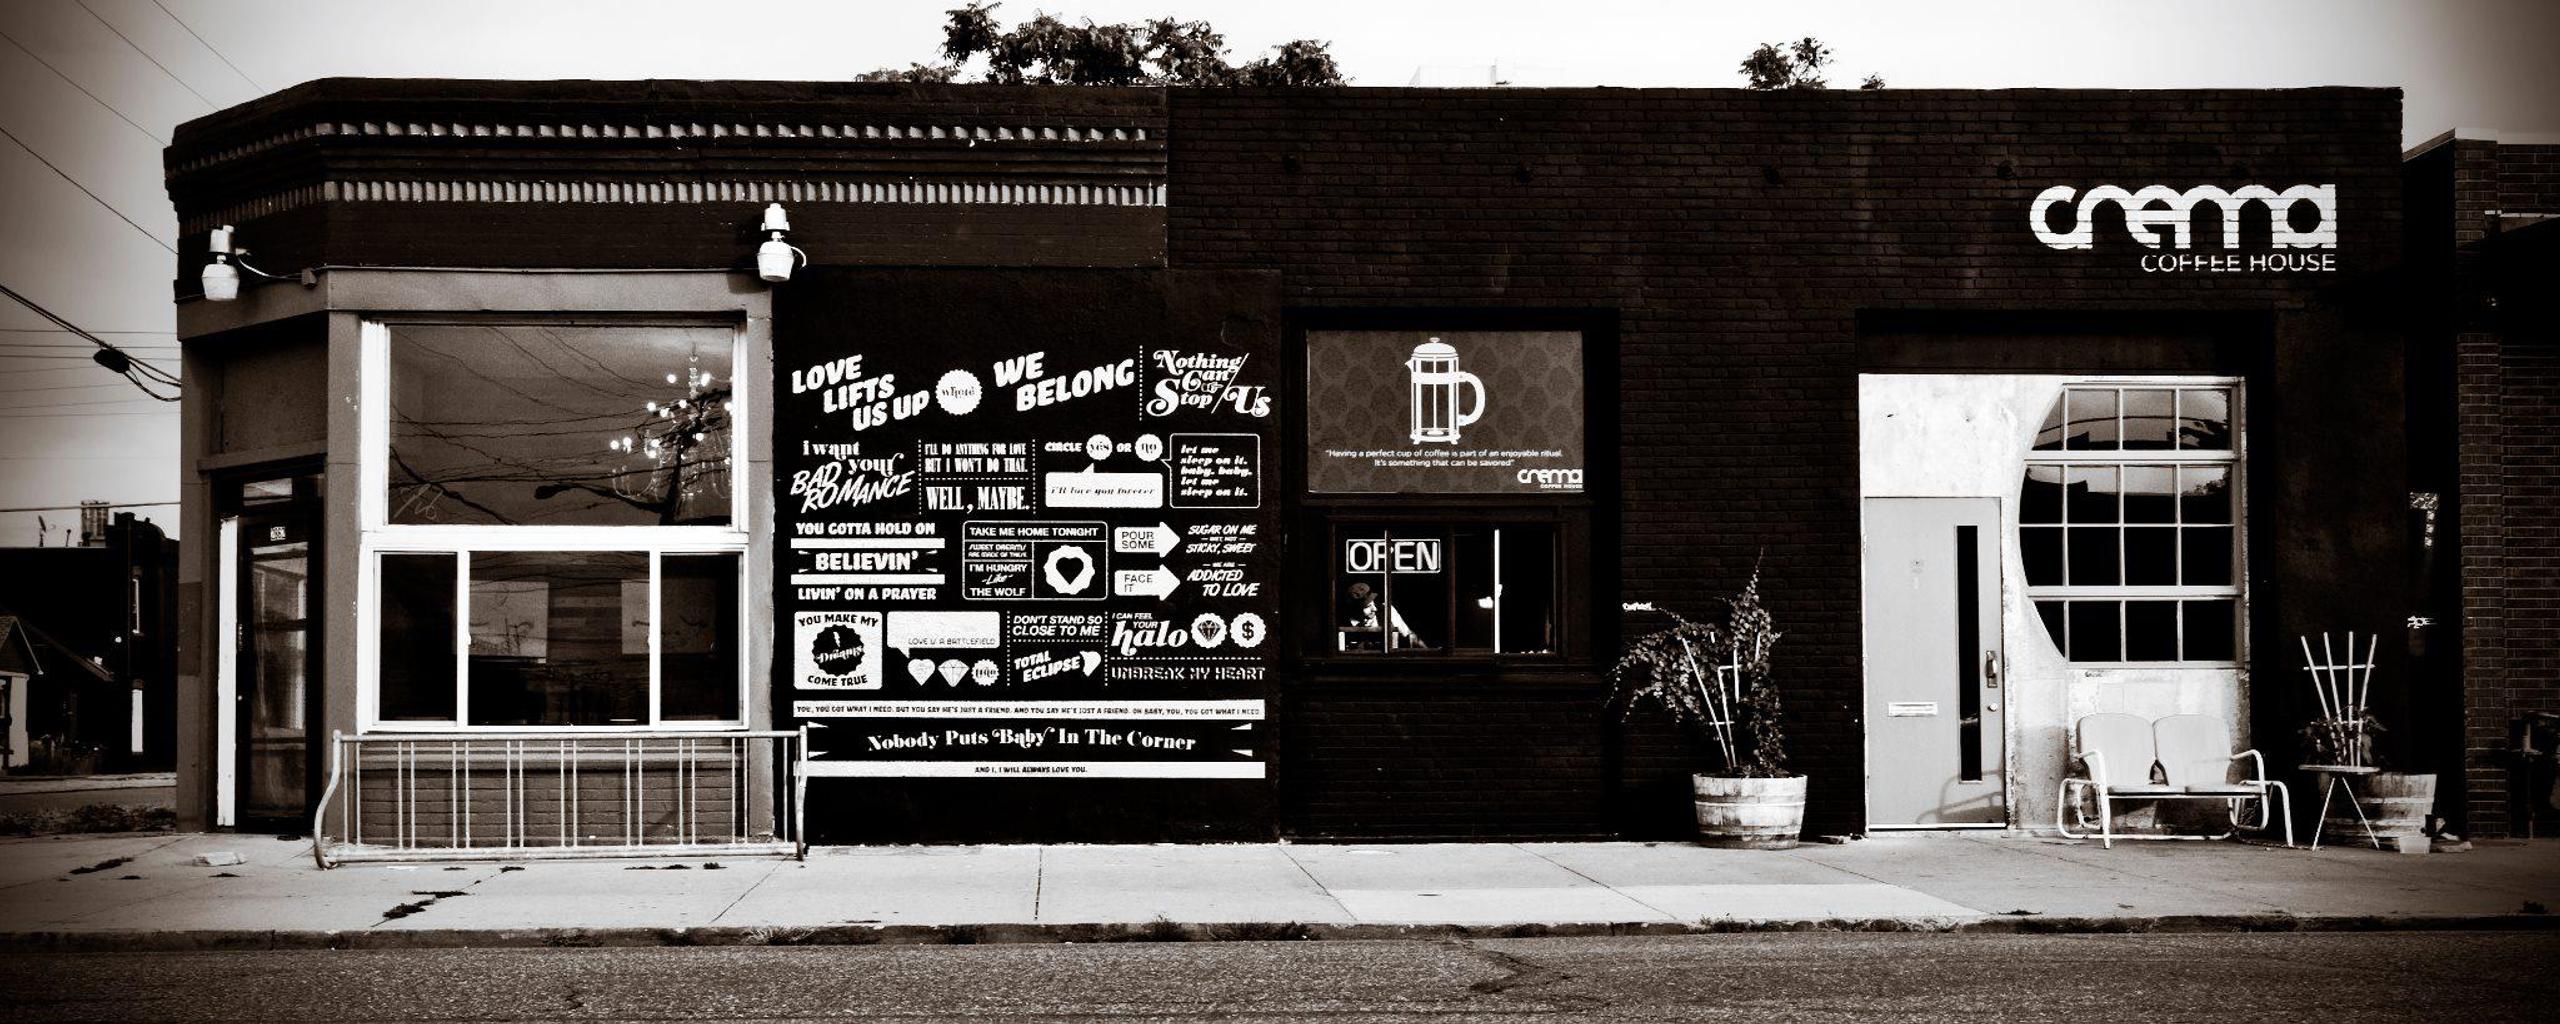 Black and white exterior view of Crema Coffee House